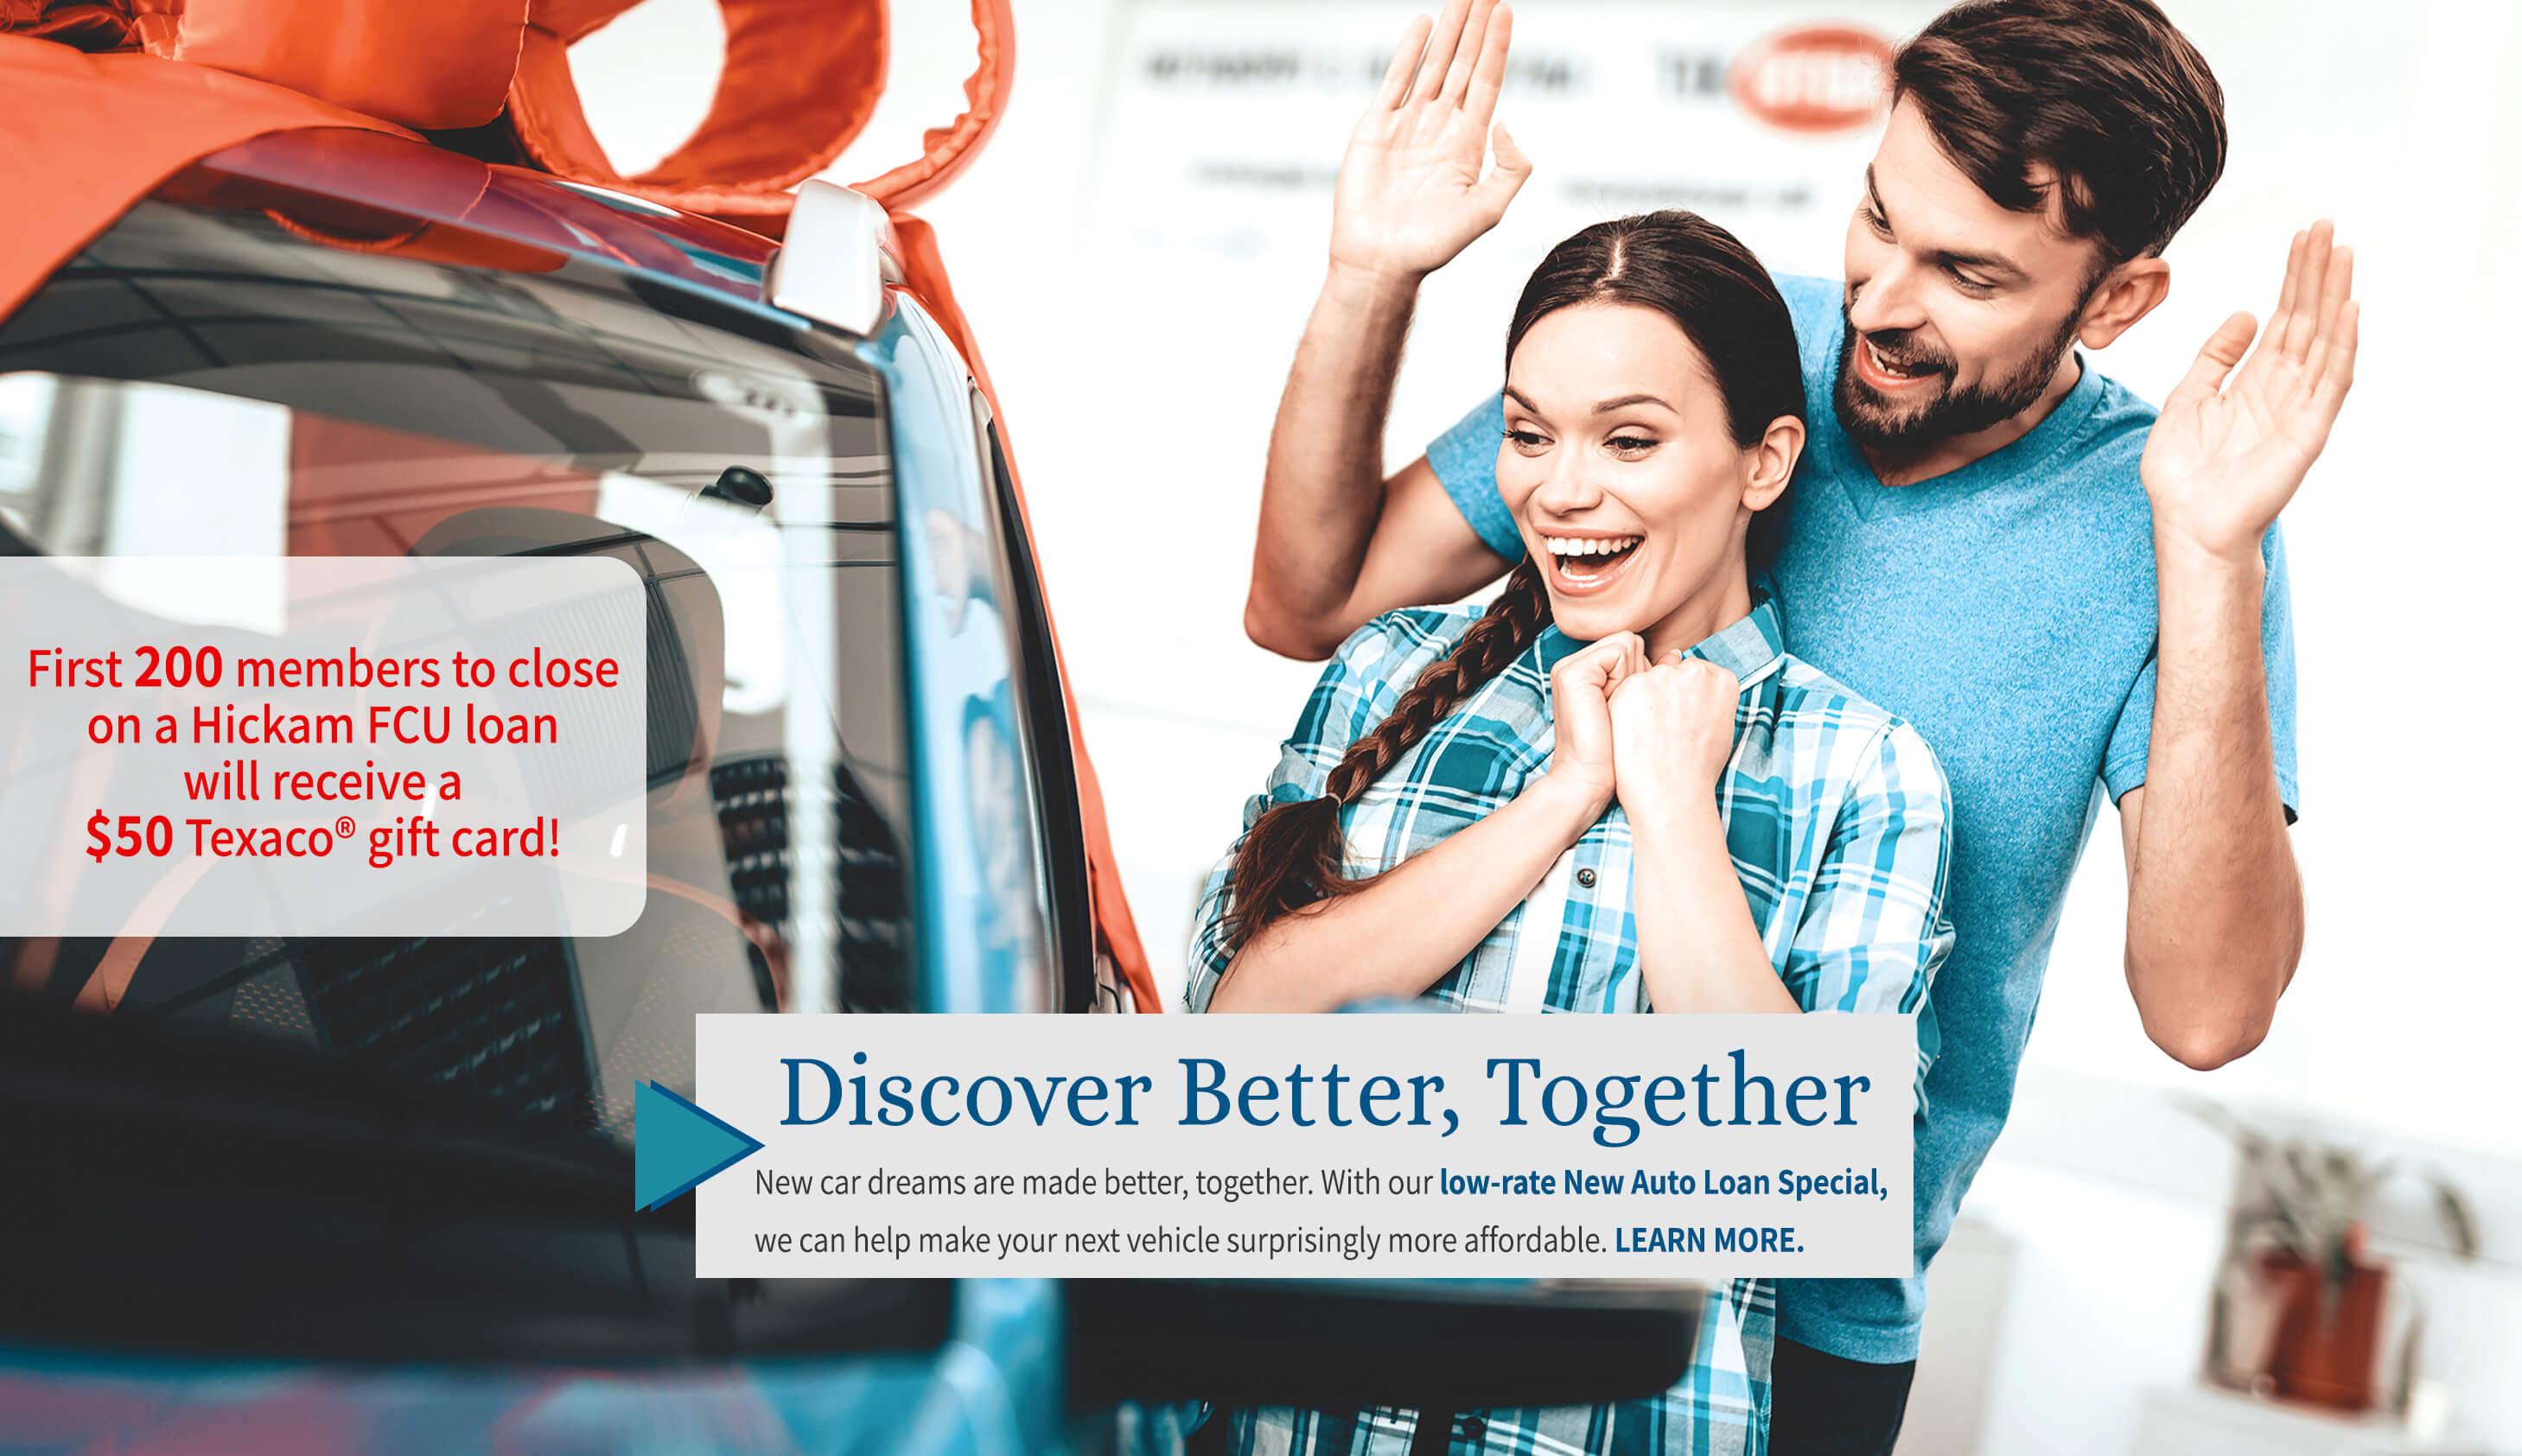 Dreams are made better, together. New Auto Loan Special for 72 months. Rates as Low as 3.24% APR.